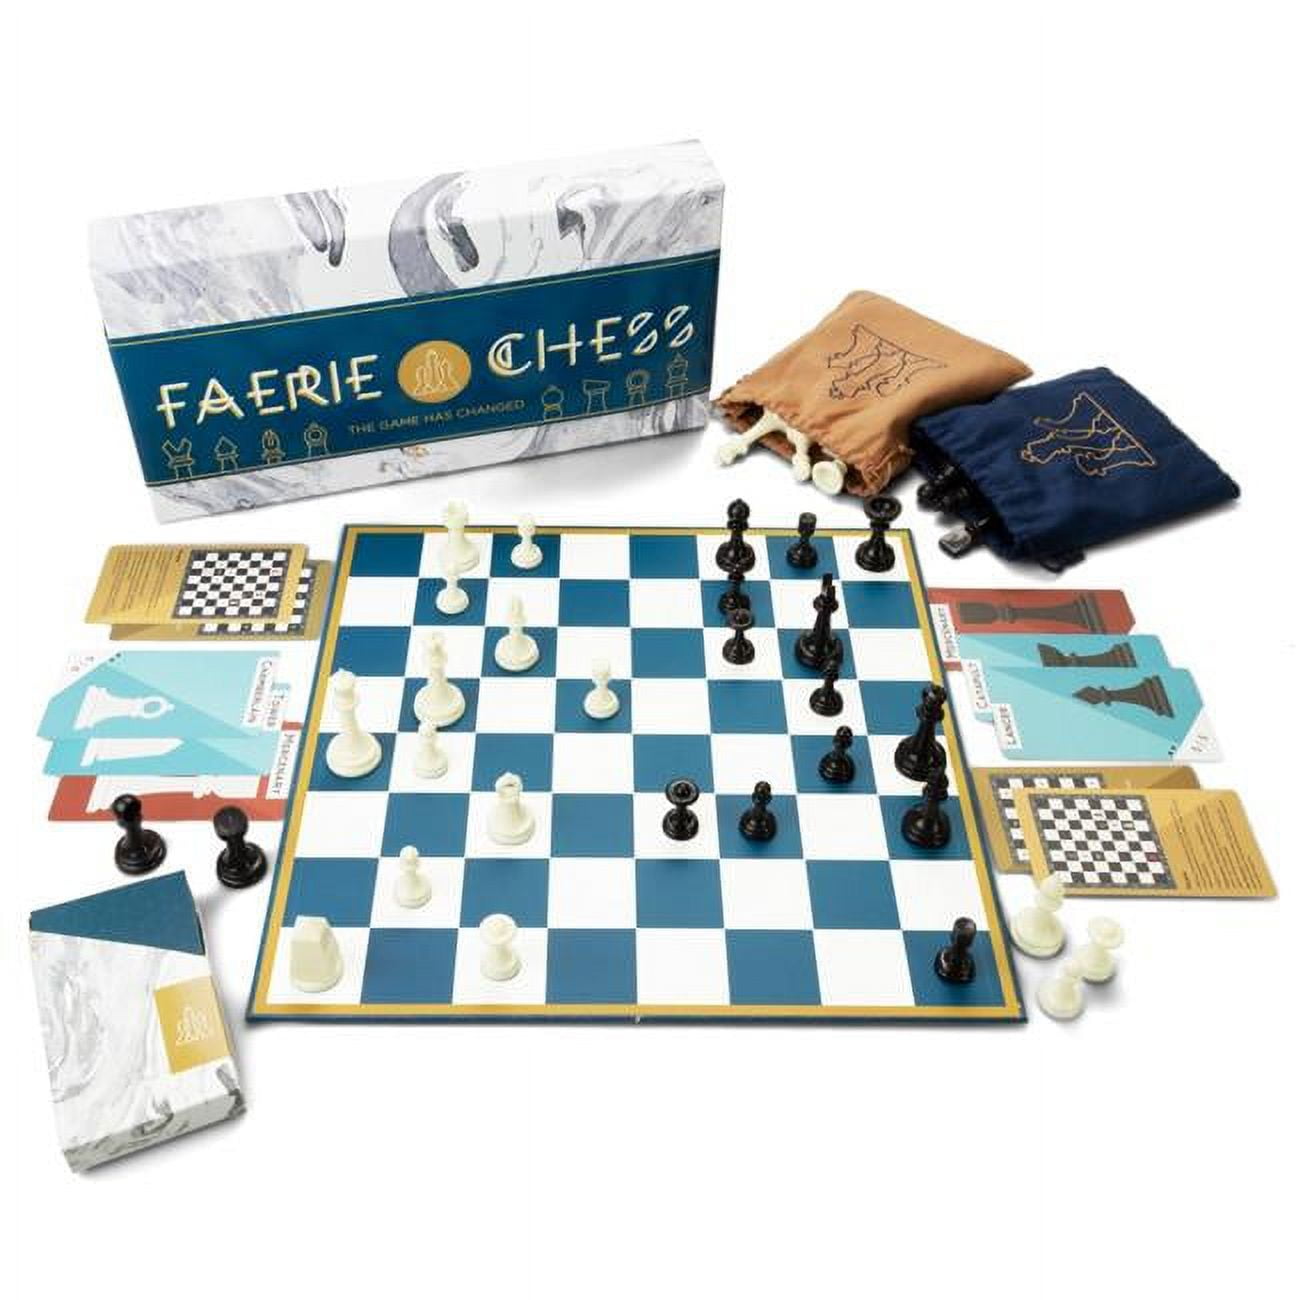 CHESSLE TIME - Chess Forums 